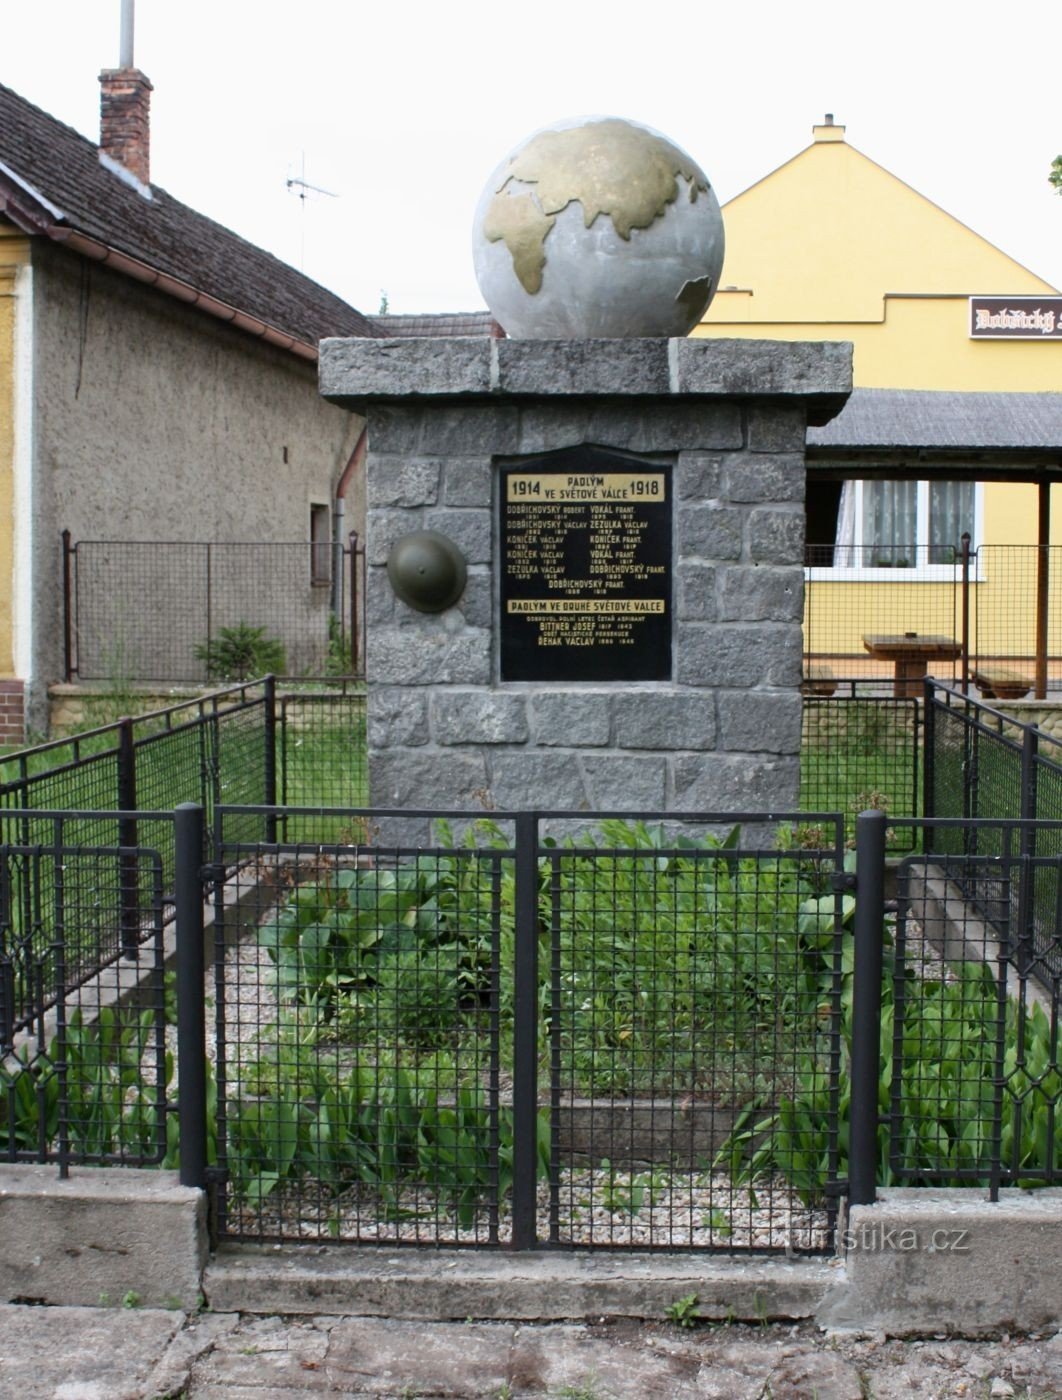 Dobšice - Memorial to the victims of WWII world war